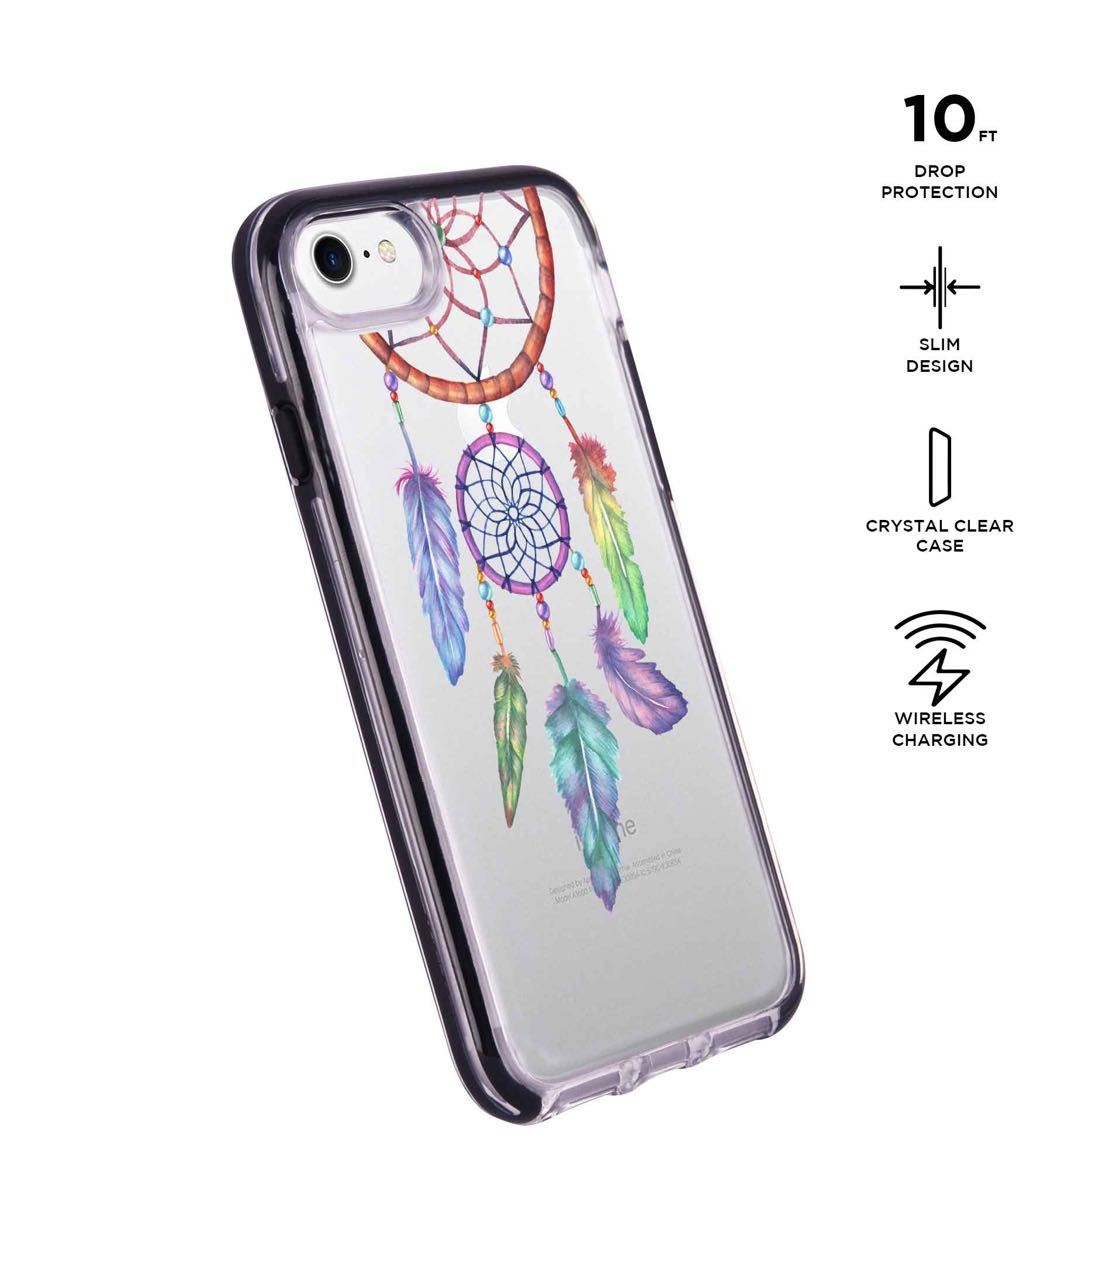 Dream Catcher Feathers - Extreme Phone Case for iPhone 7